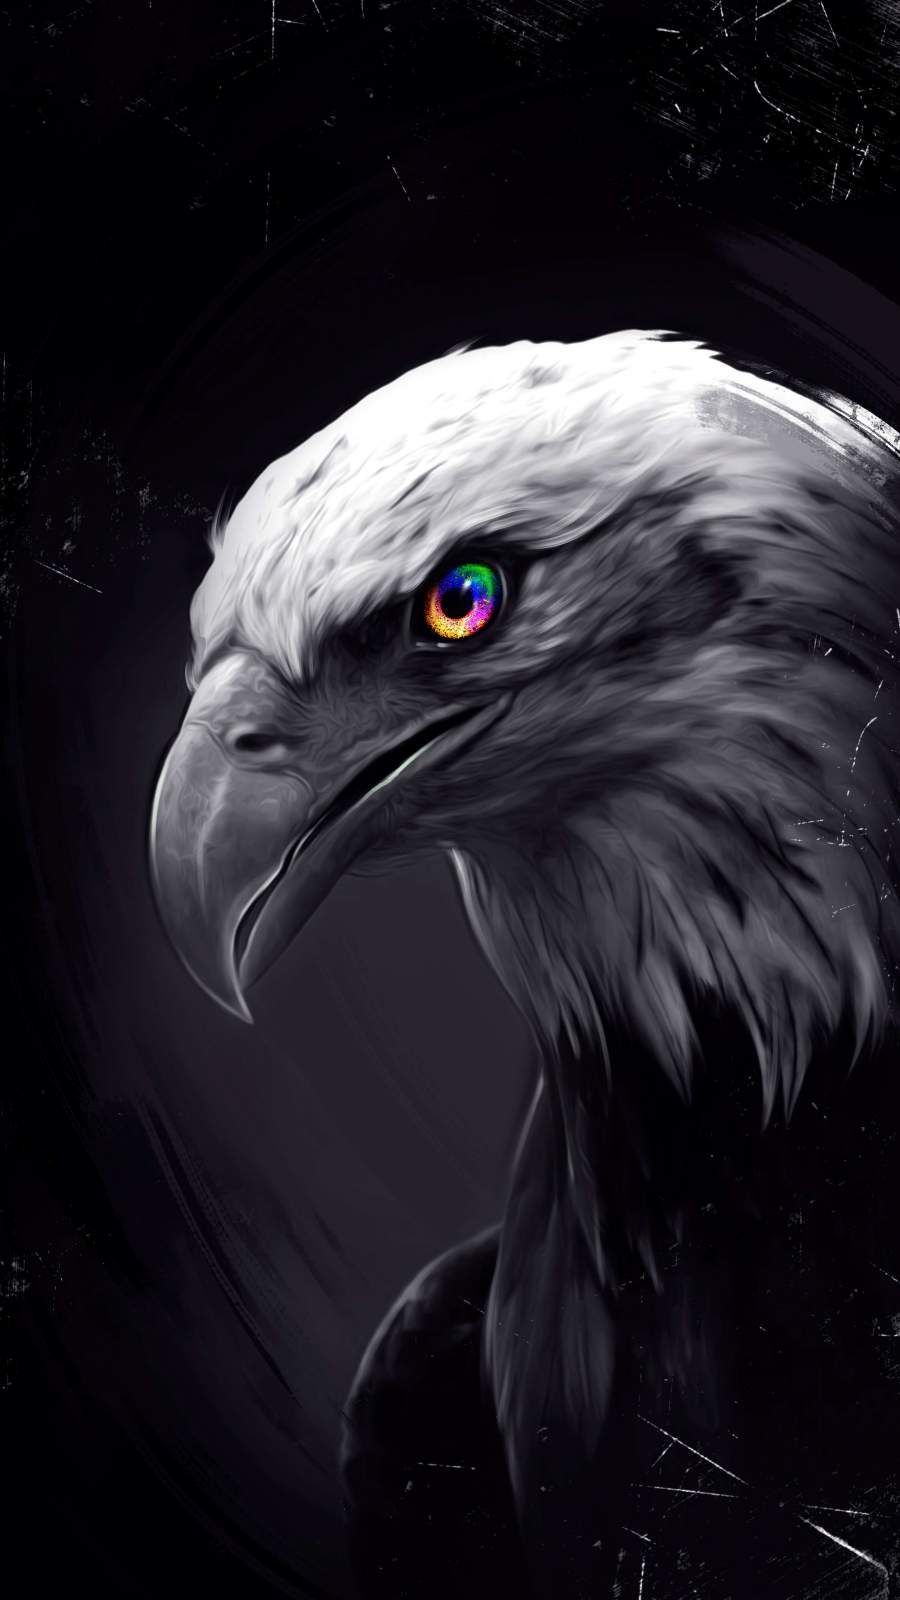 Eagle Portrait On A Dark Background. 3d Rendering And Illustration Free  Image and Photograph 198358500.